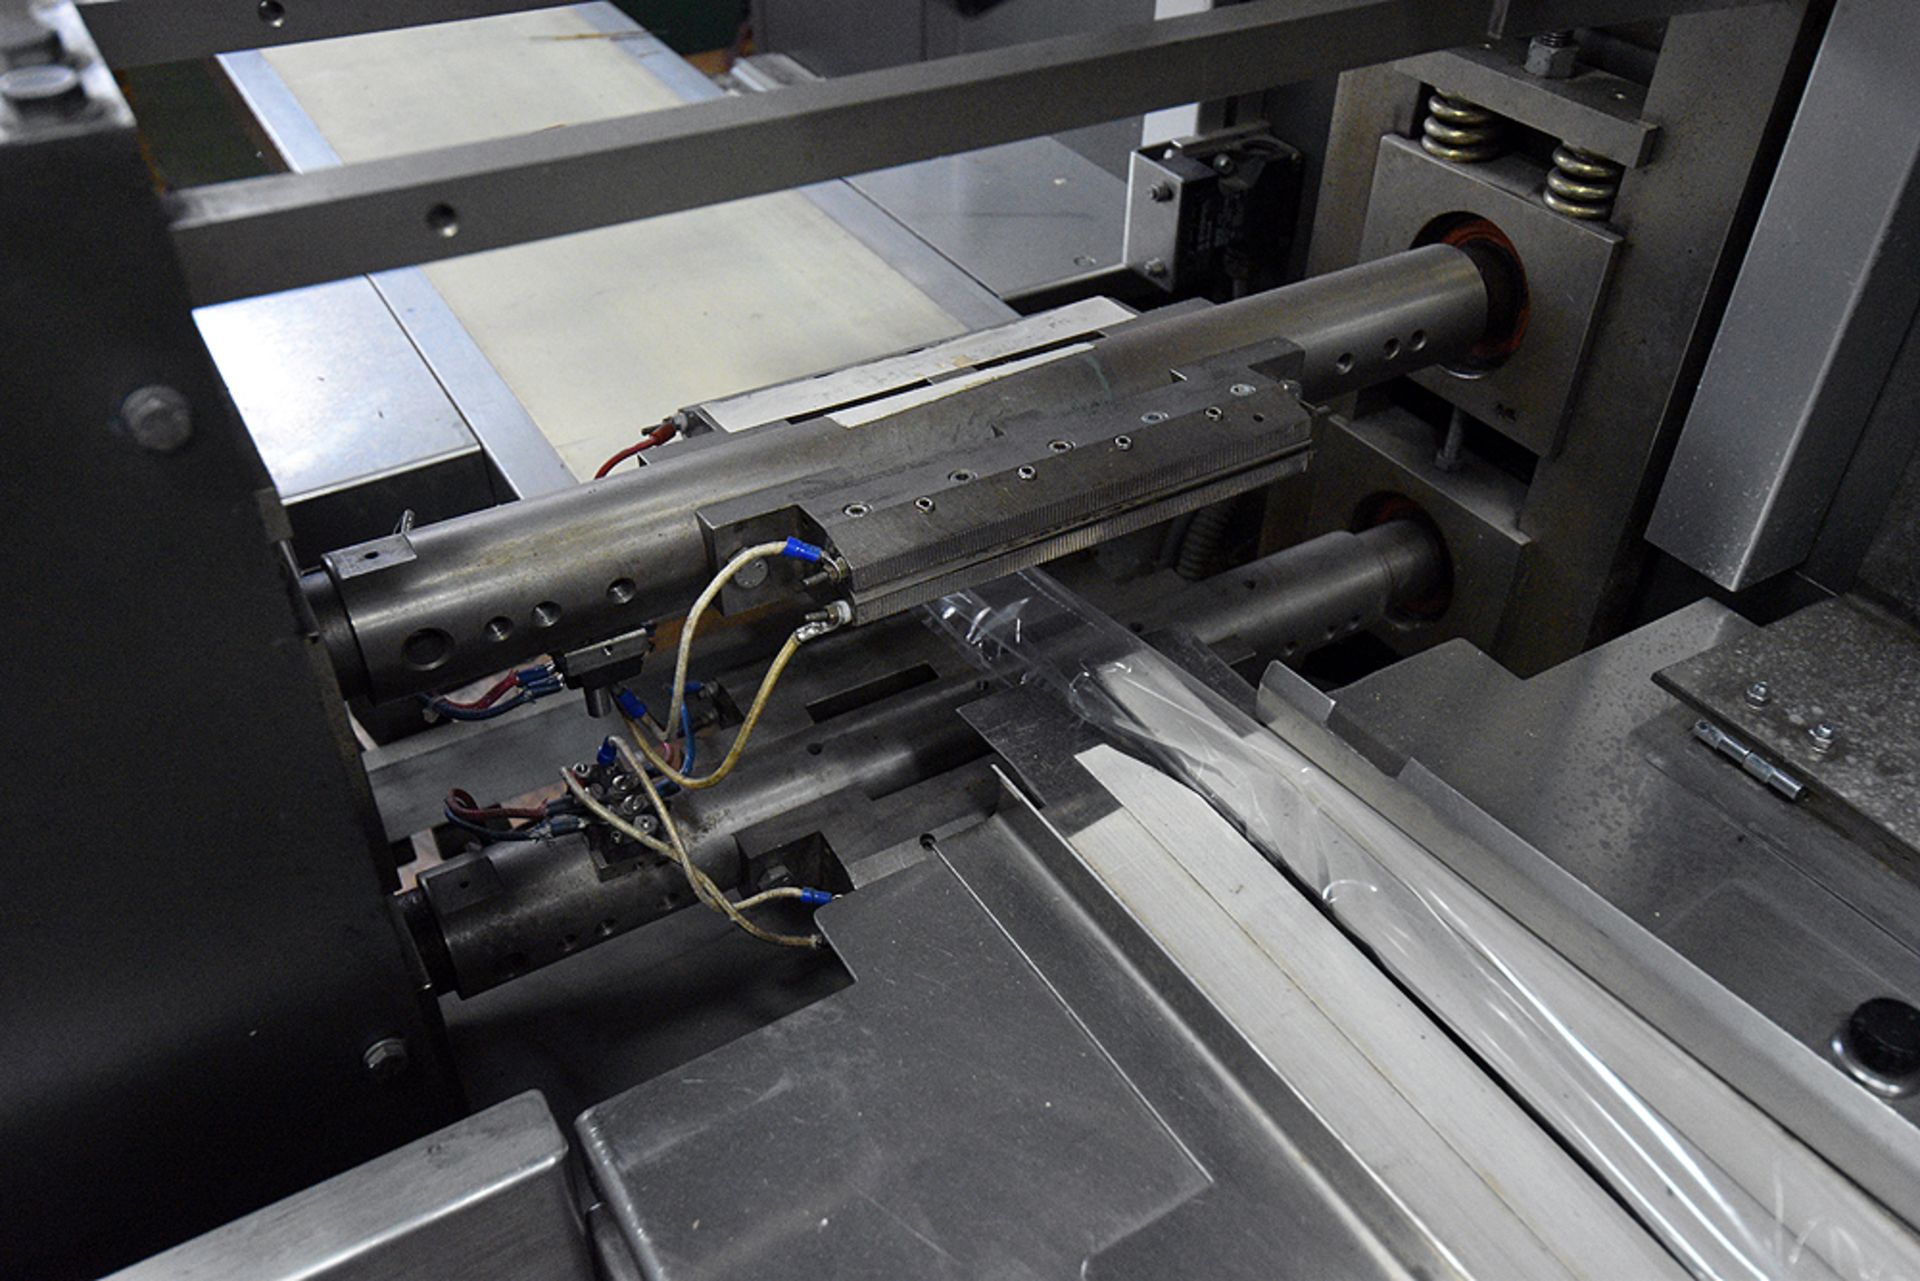 Sasib WE-150 Multi-Axis Horizontal Flo-Wrapper Line w/Attachments (See Pictures for Reference) - Image 4 of 20